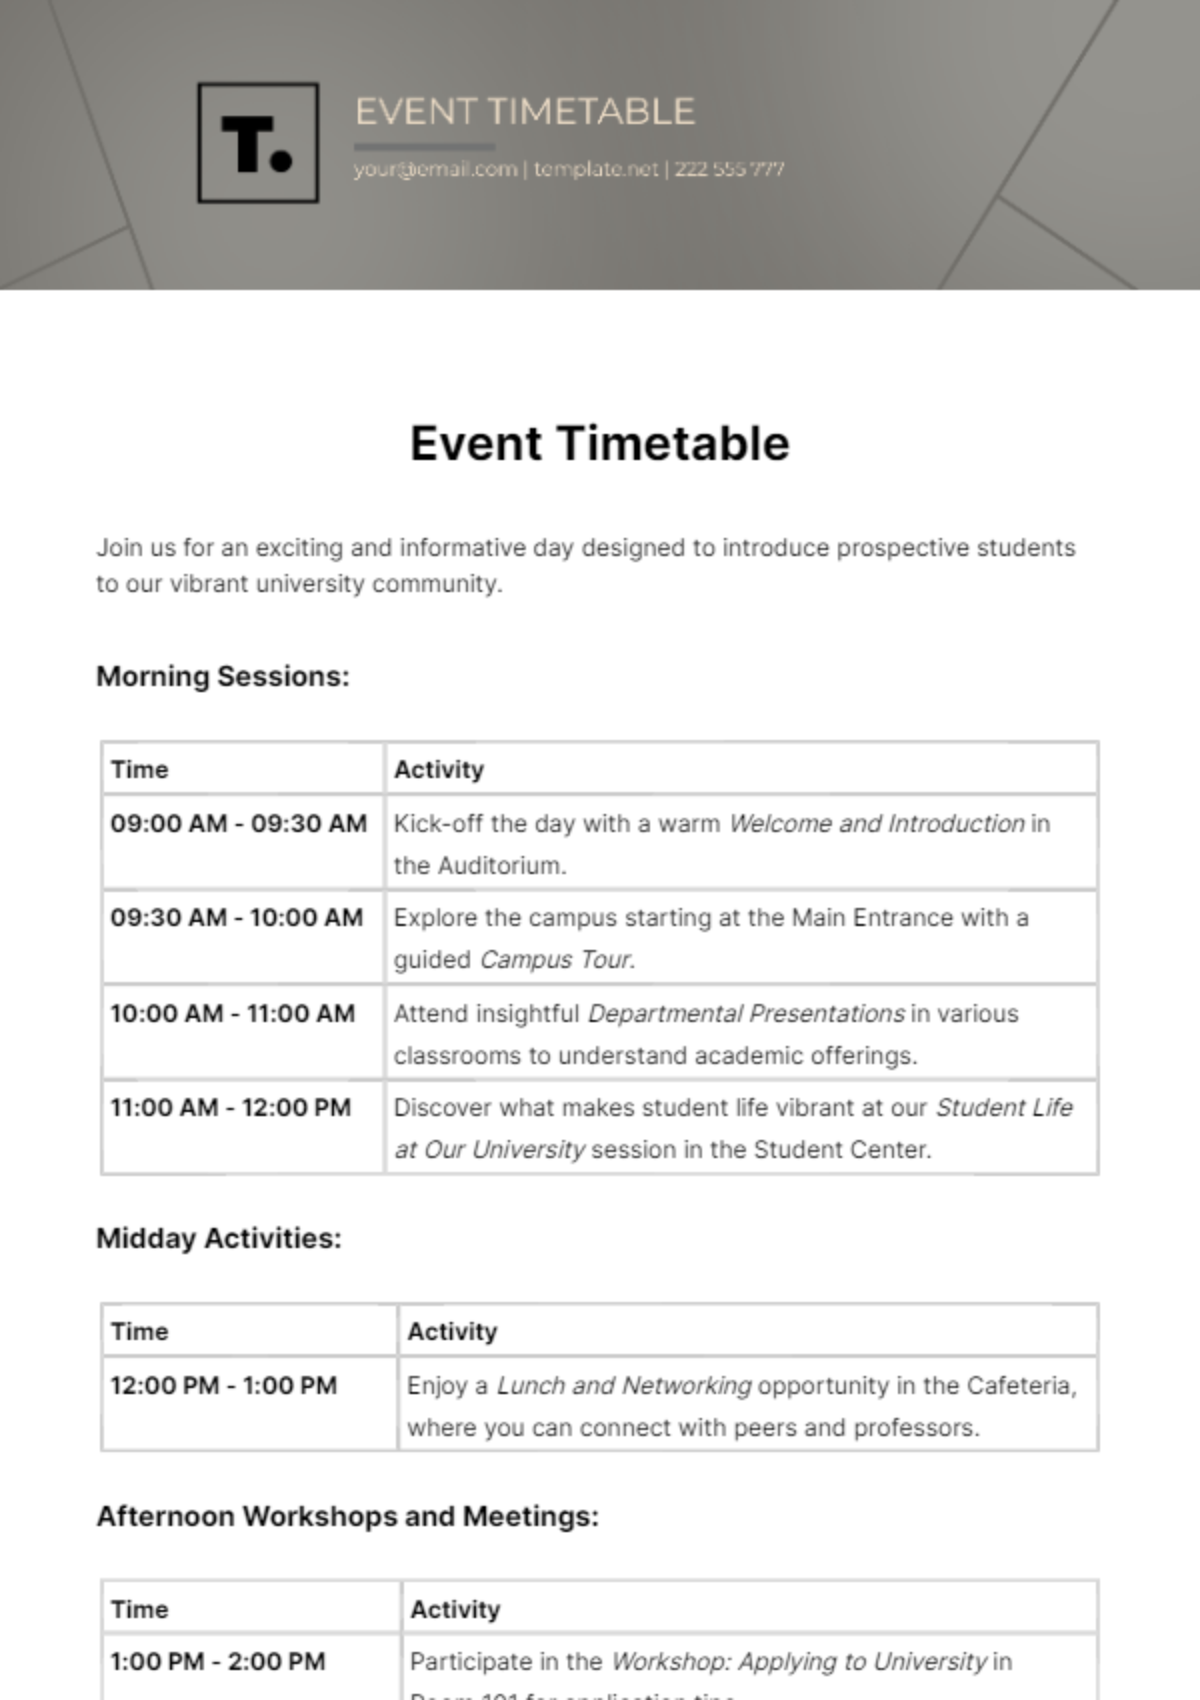 Event Timetable Template